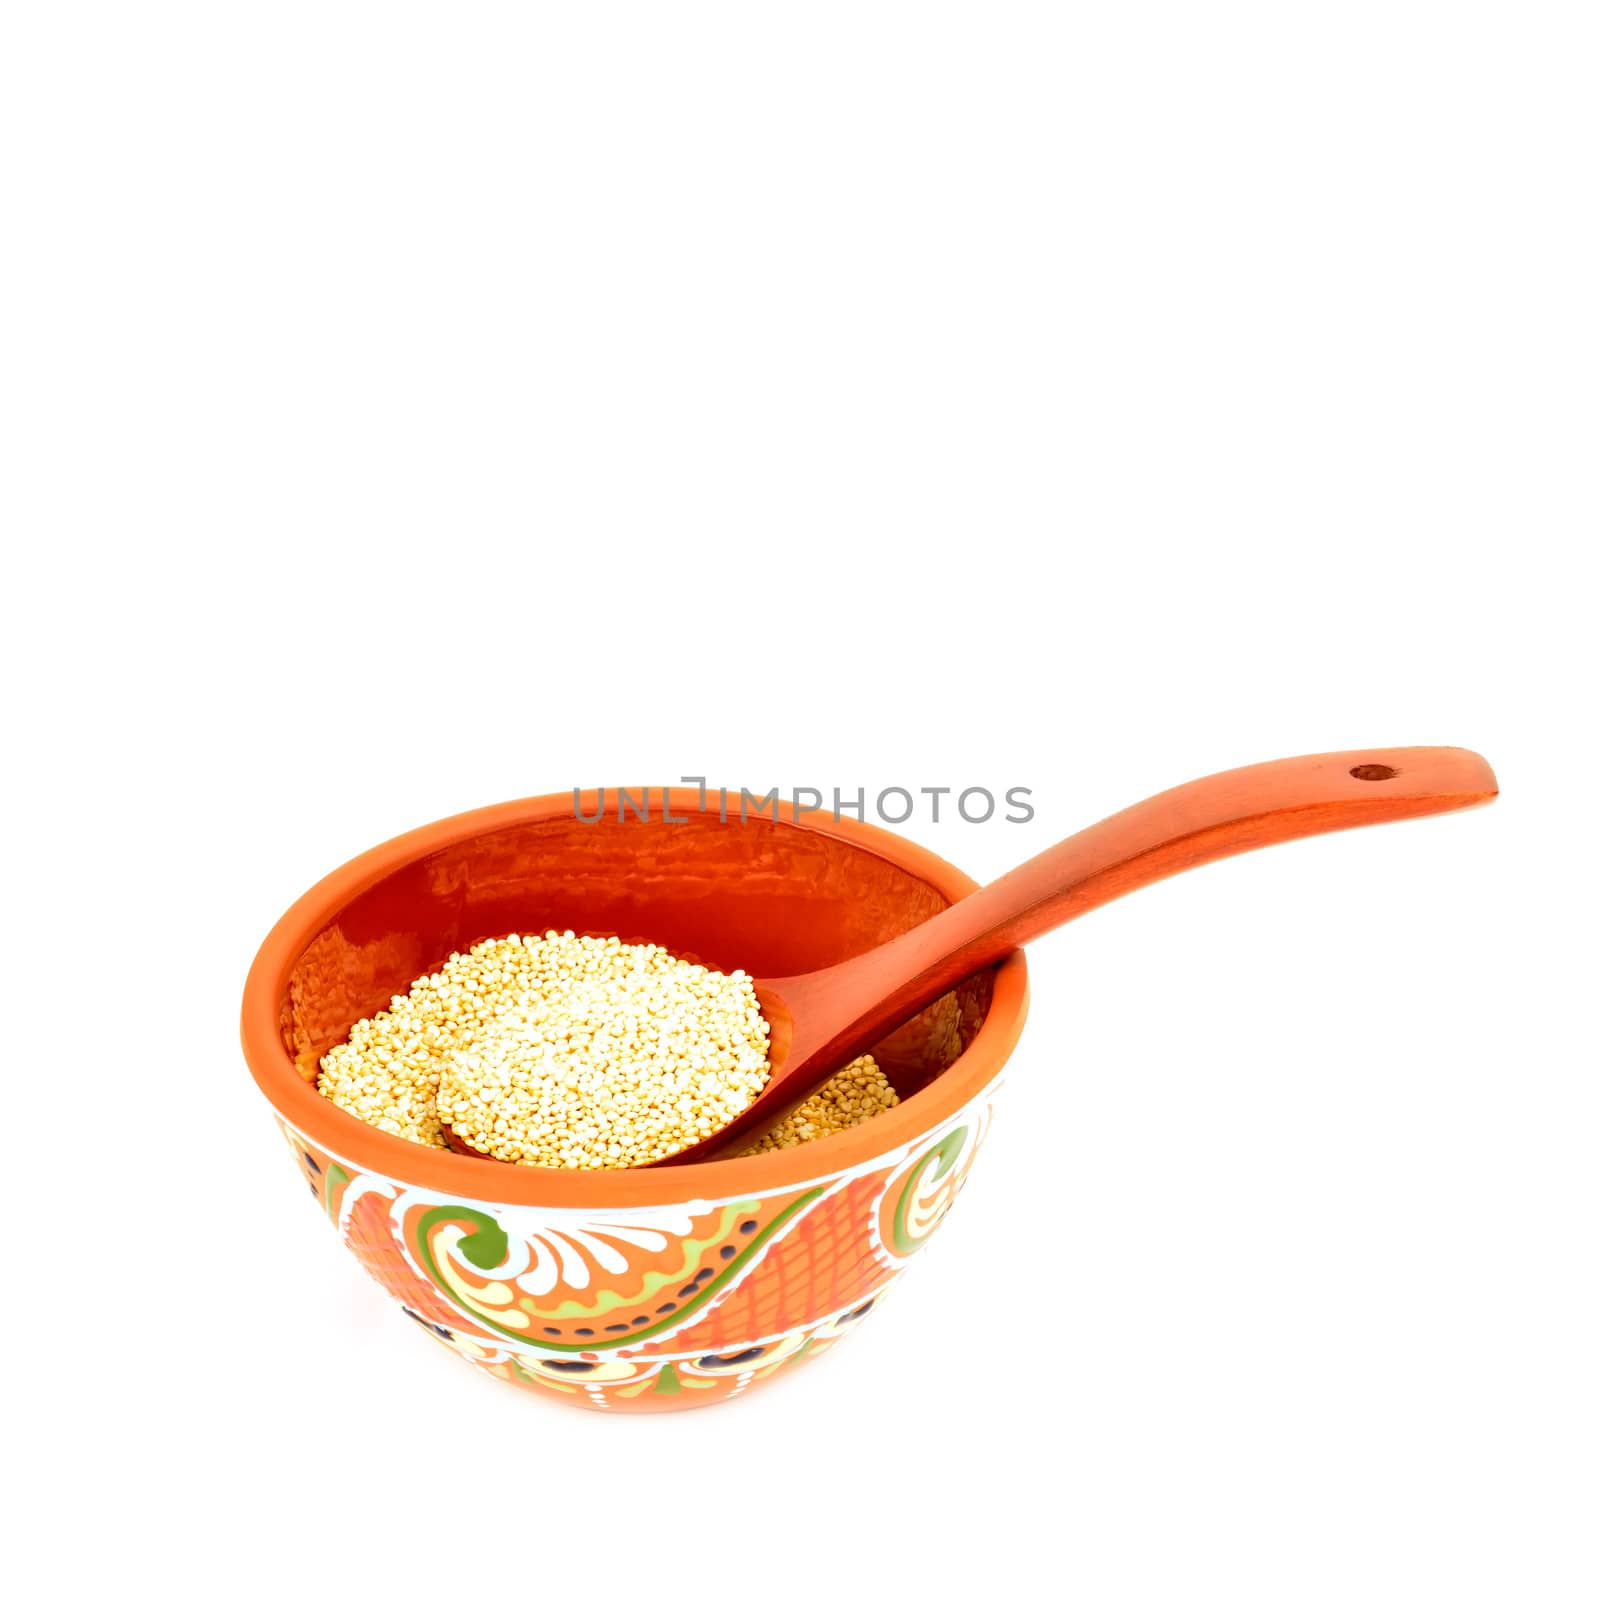 quinoa in clay bowl and wooden spoon isolated on white background